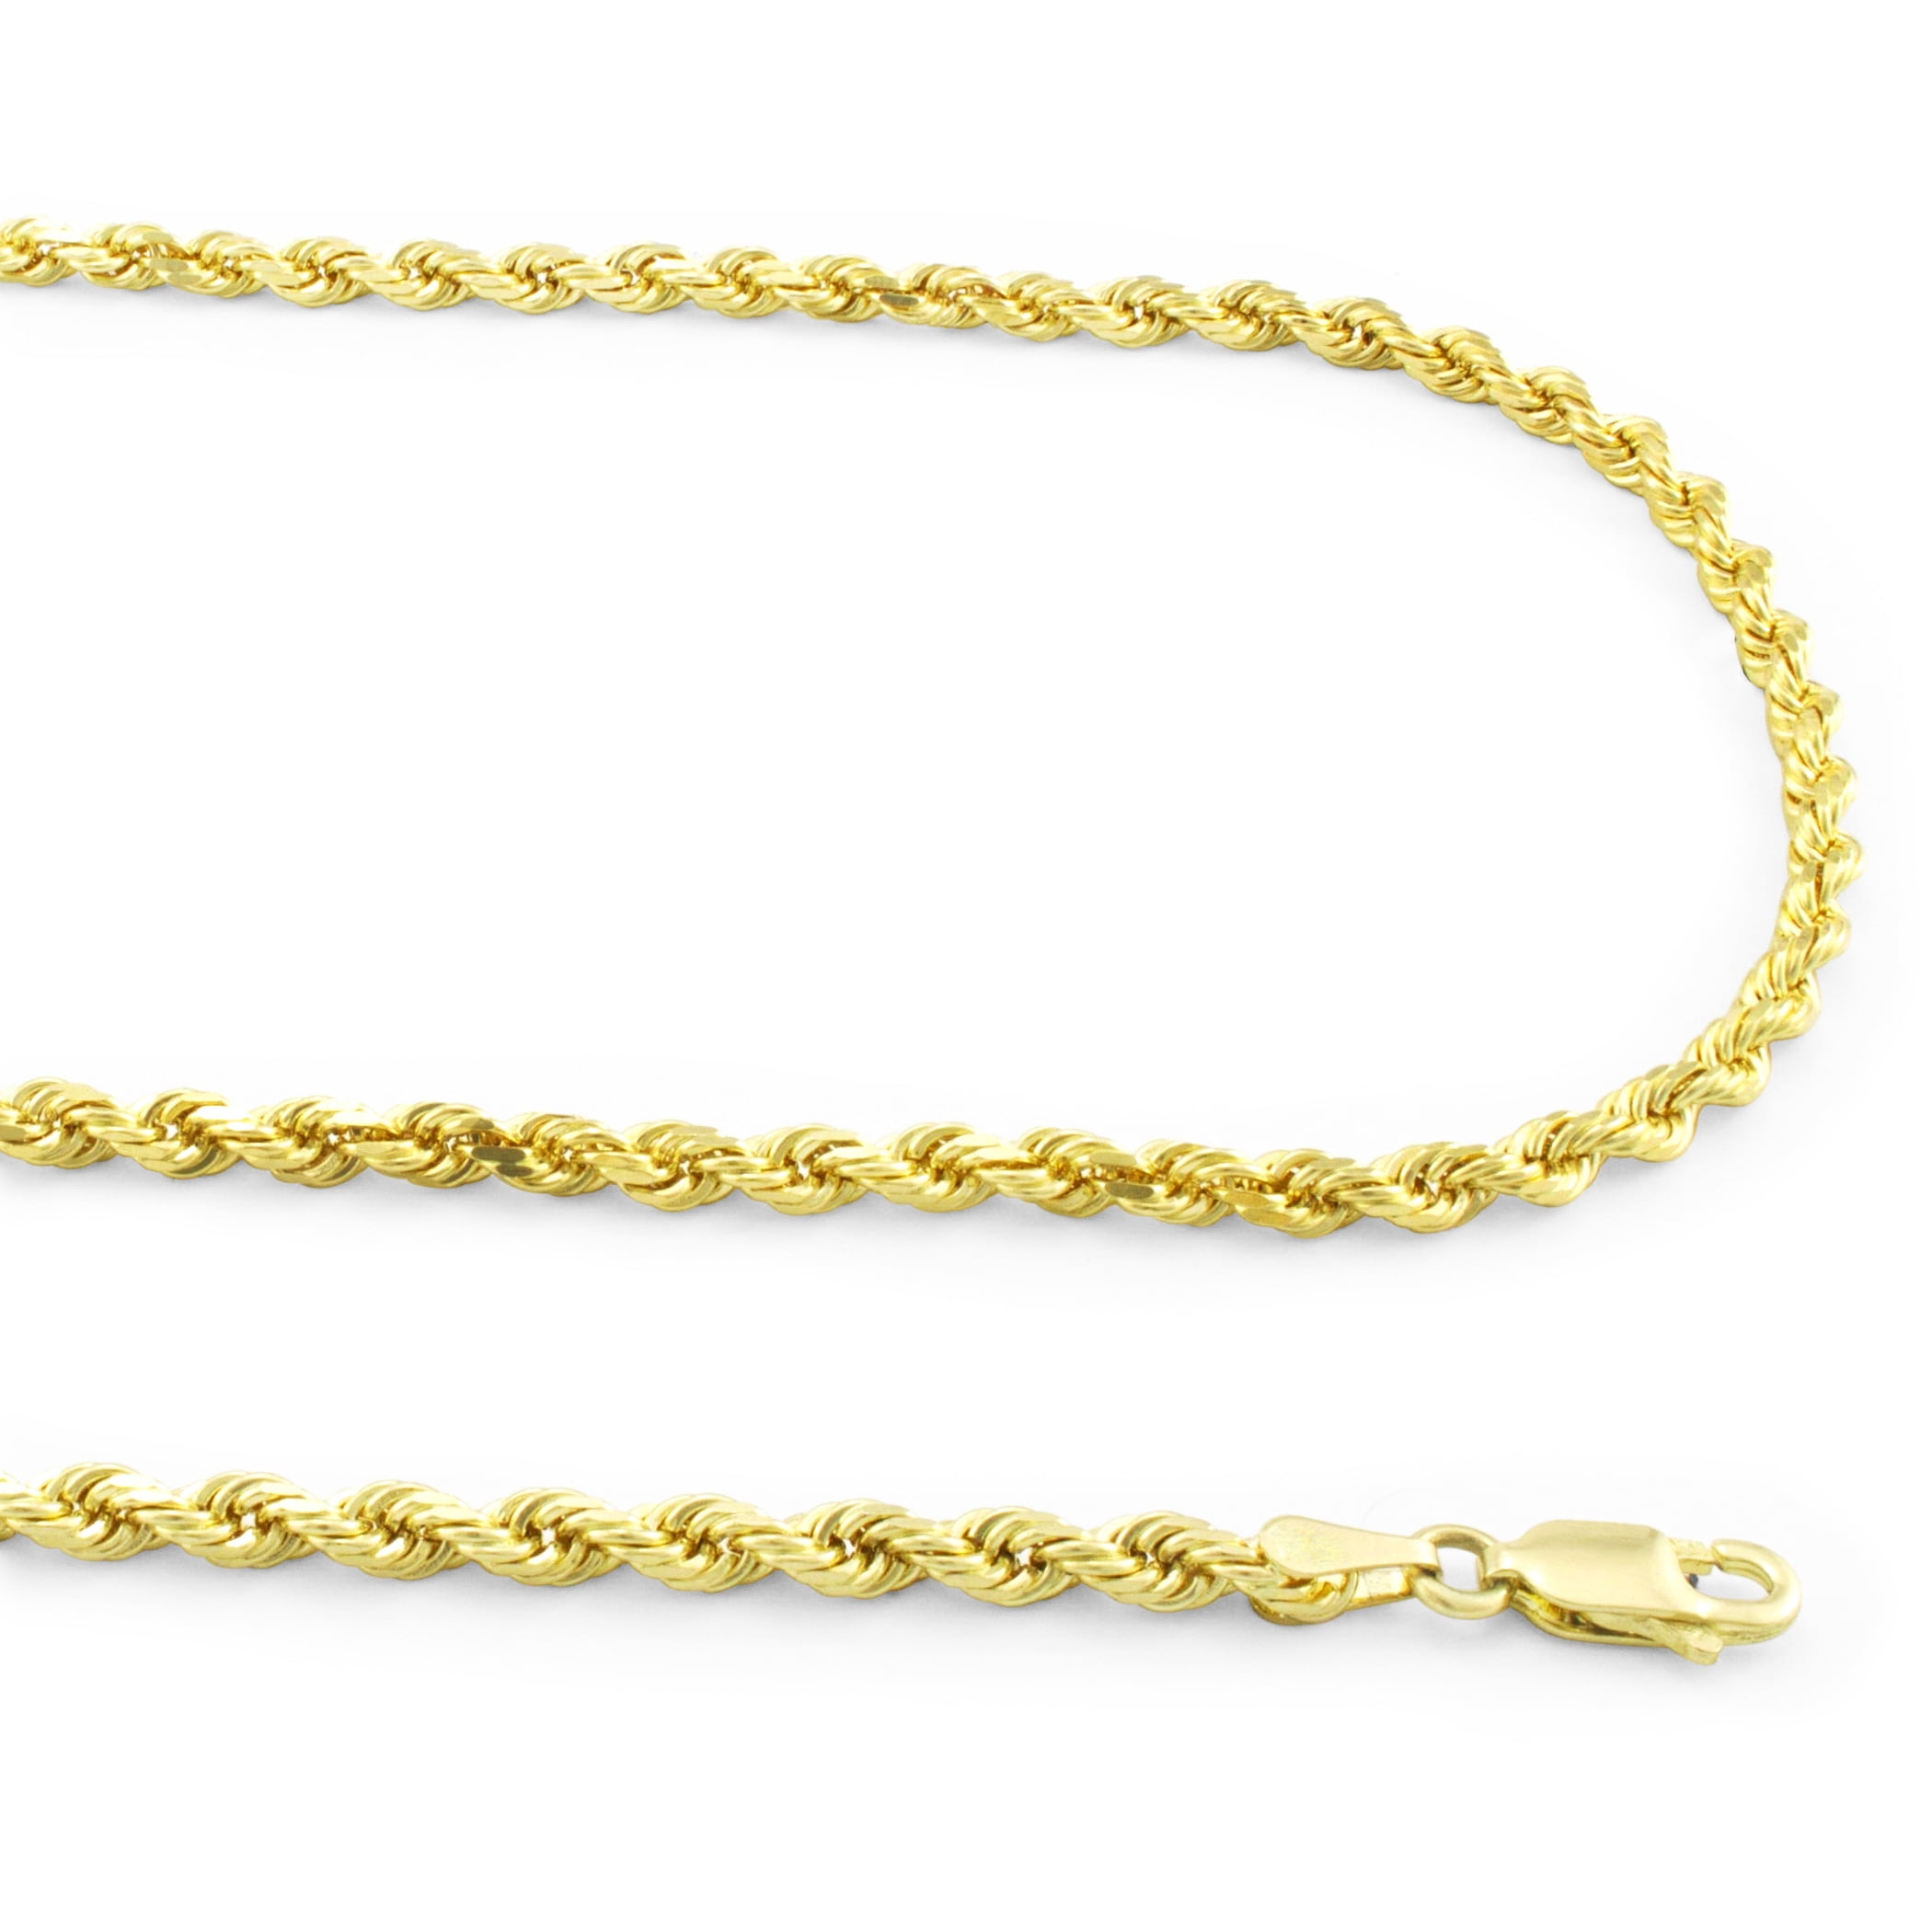 2.5mm Diamond Cut Rope Chain Necklace Extender Pendant Real 10K Yellow Gold 